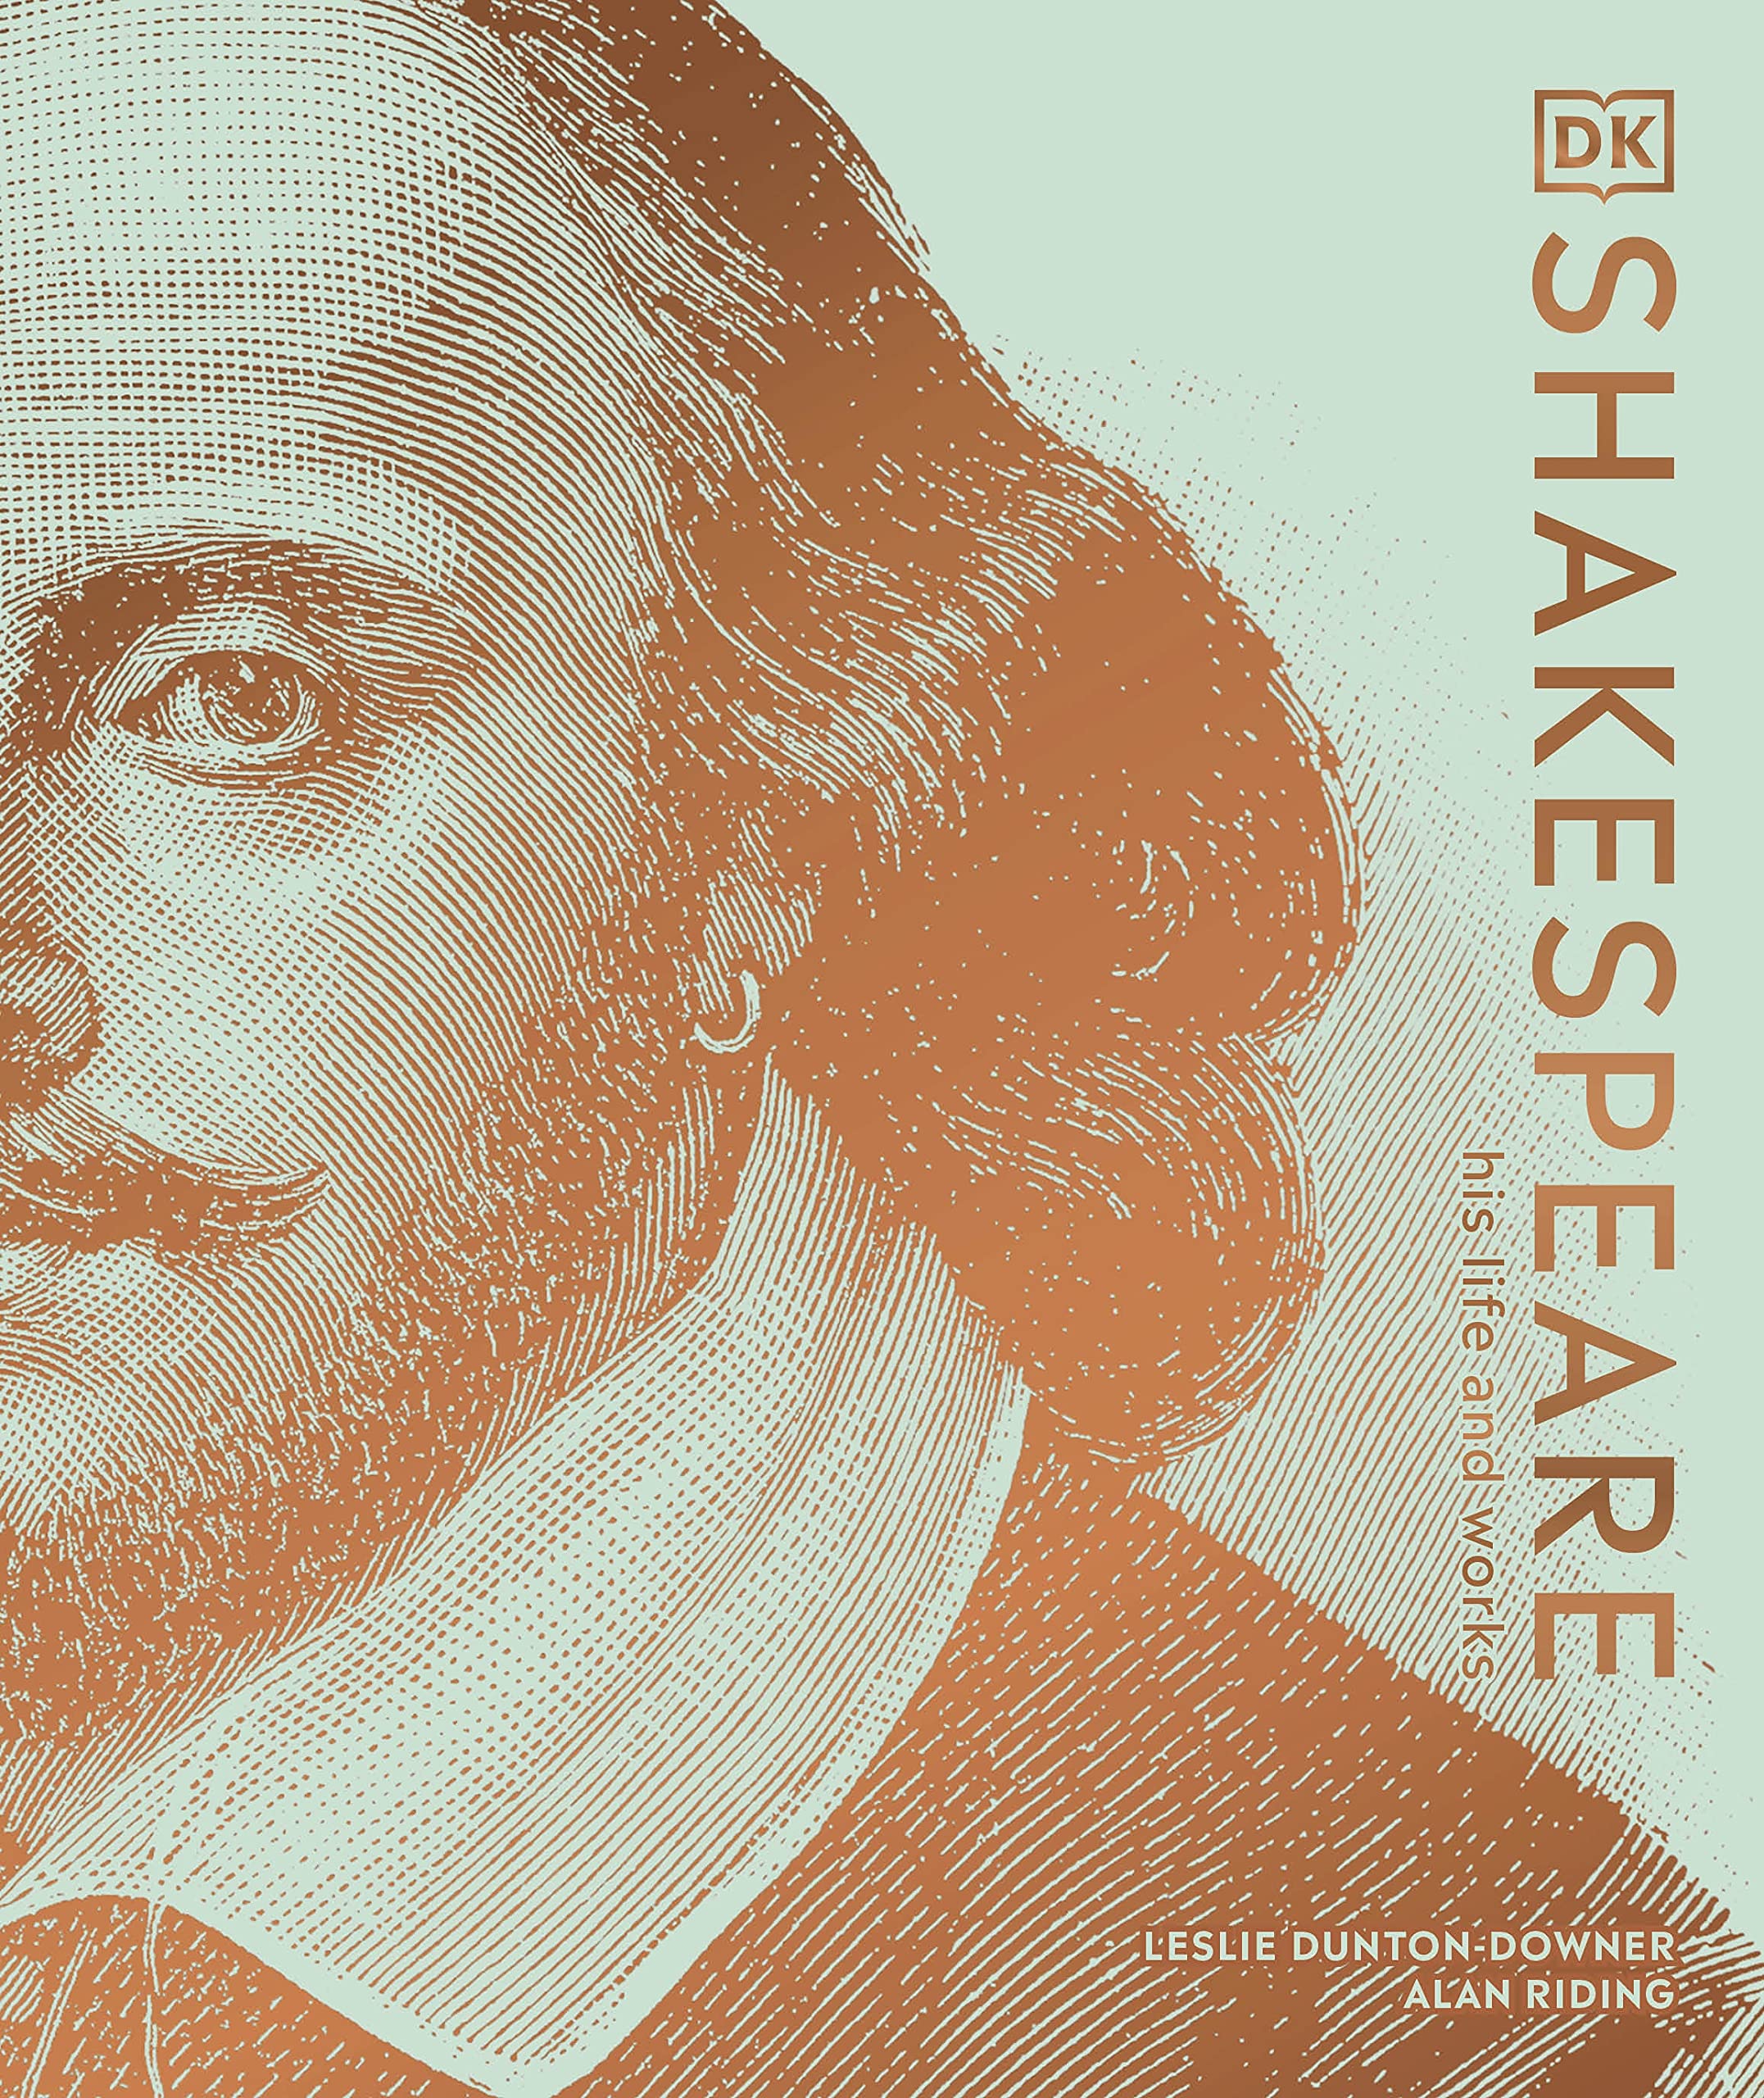 Shakespeare His Life and Works | Alan Riding, Leslie Dunton-Downer